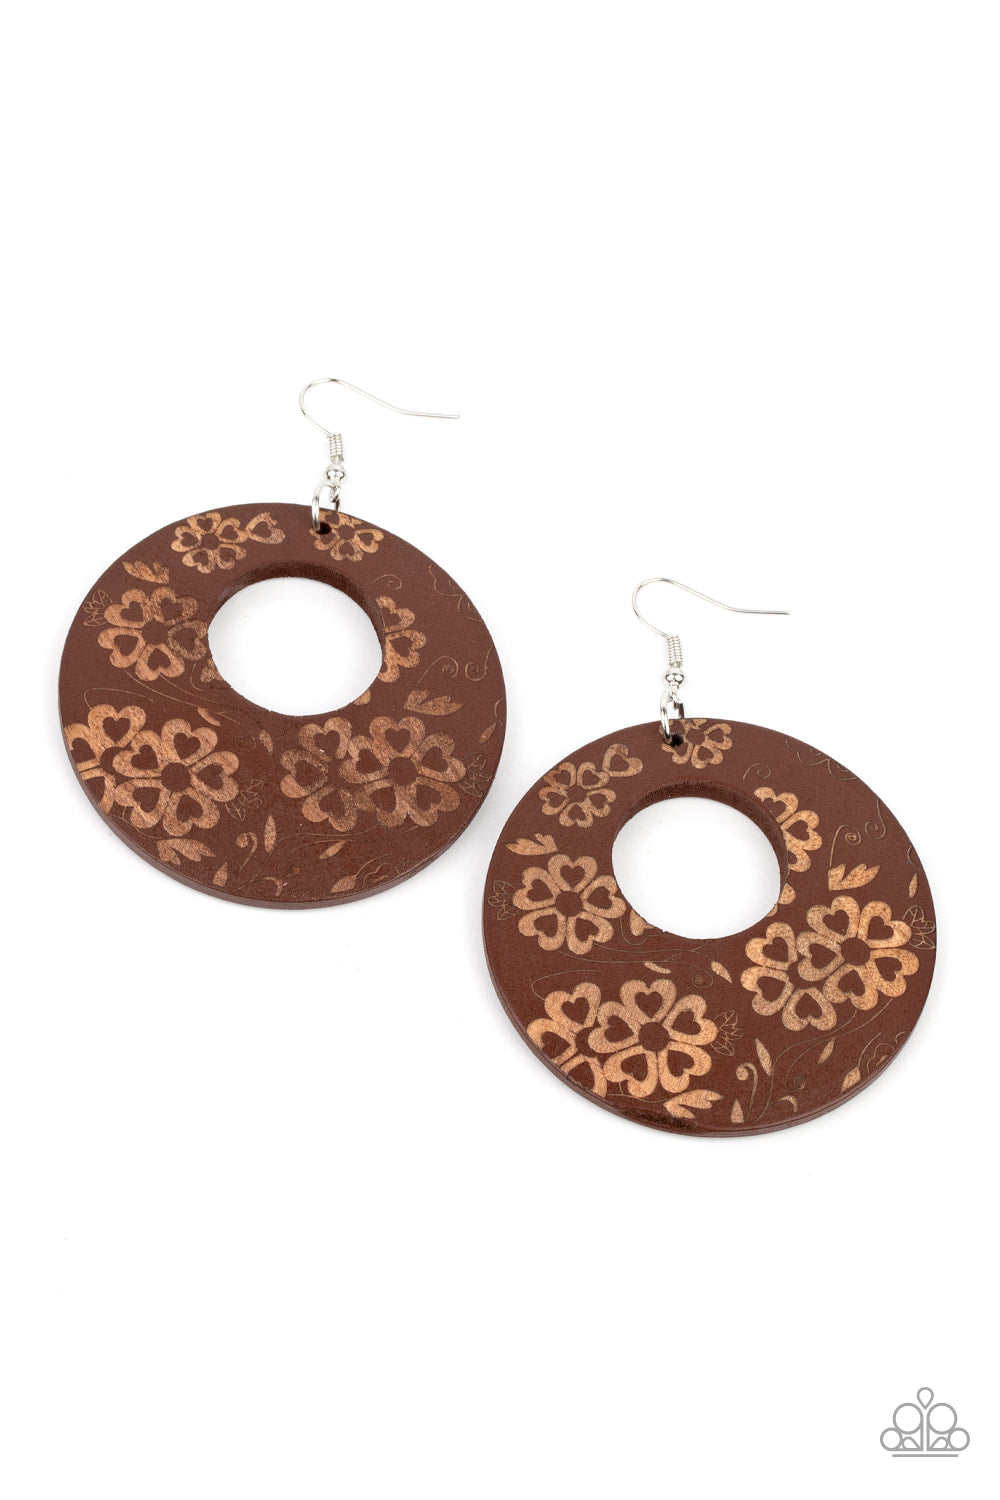 Galapagos Garden Party - Brown Wooden Earrings - Paparazzi Accessories - GlaMarous Titi Jewels